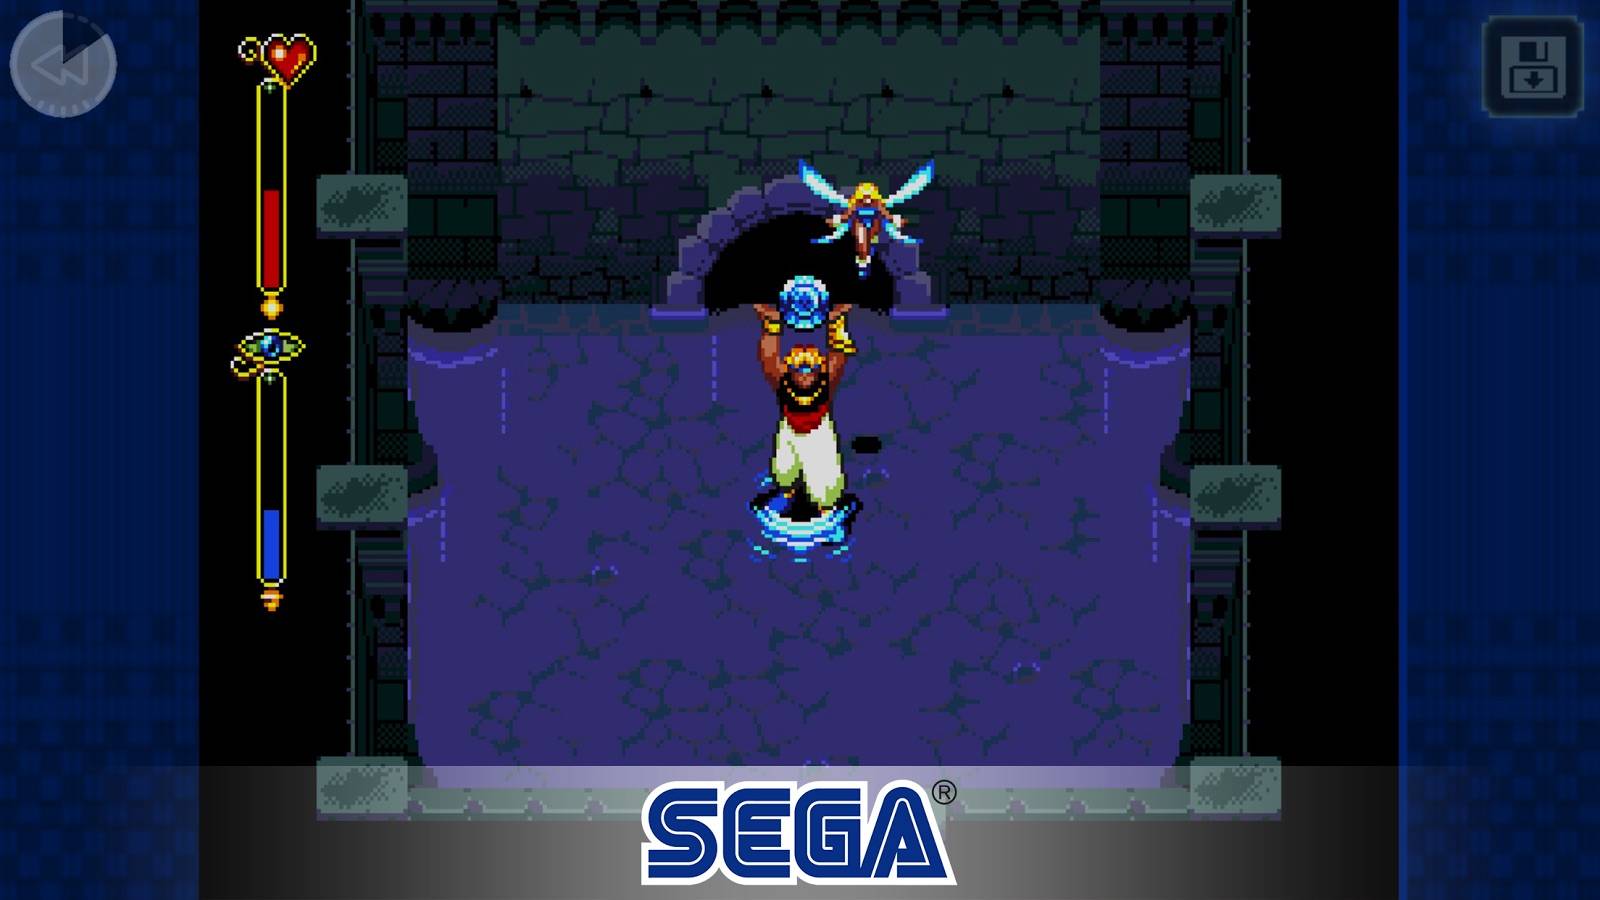 SEGA Forever adds 'Beyond Oasis Classic' to the collection - Android  Community